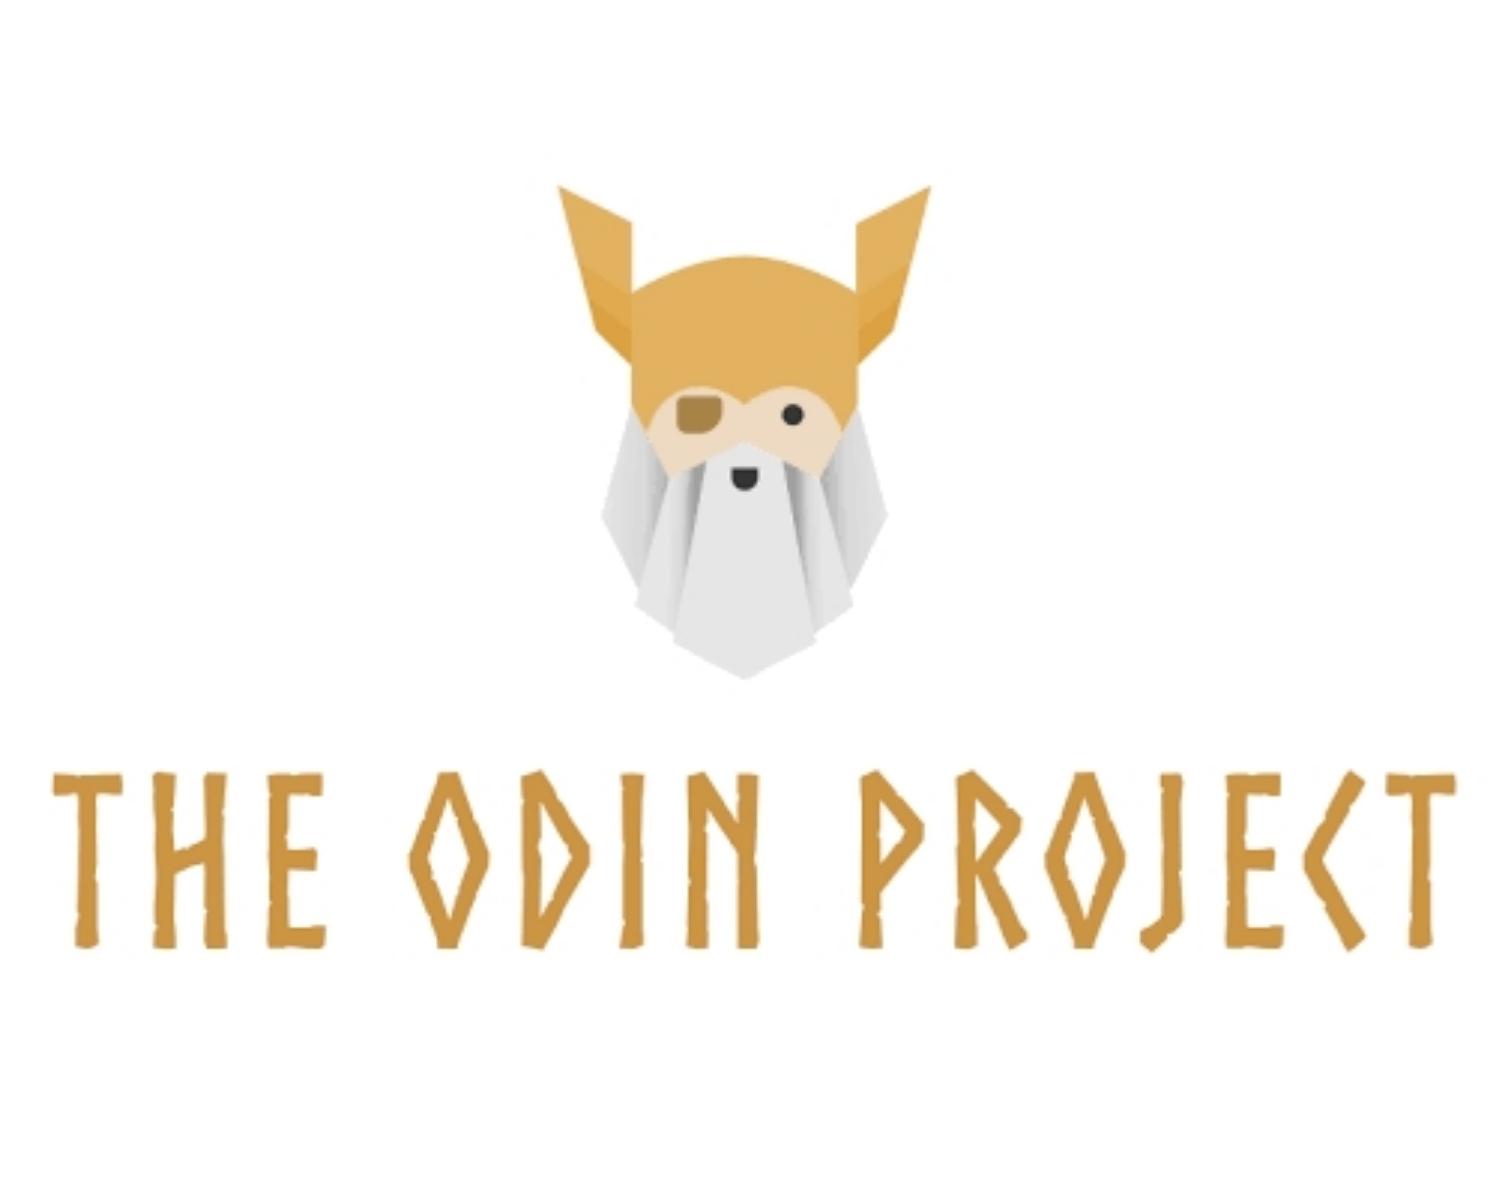 THE ODIN PROJECT